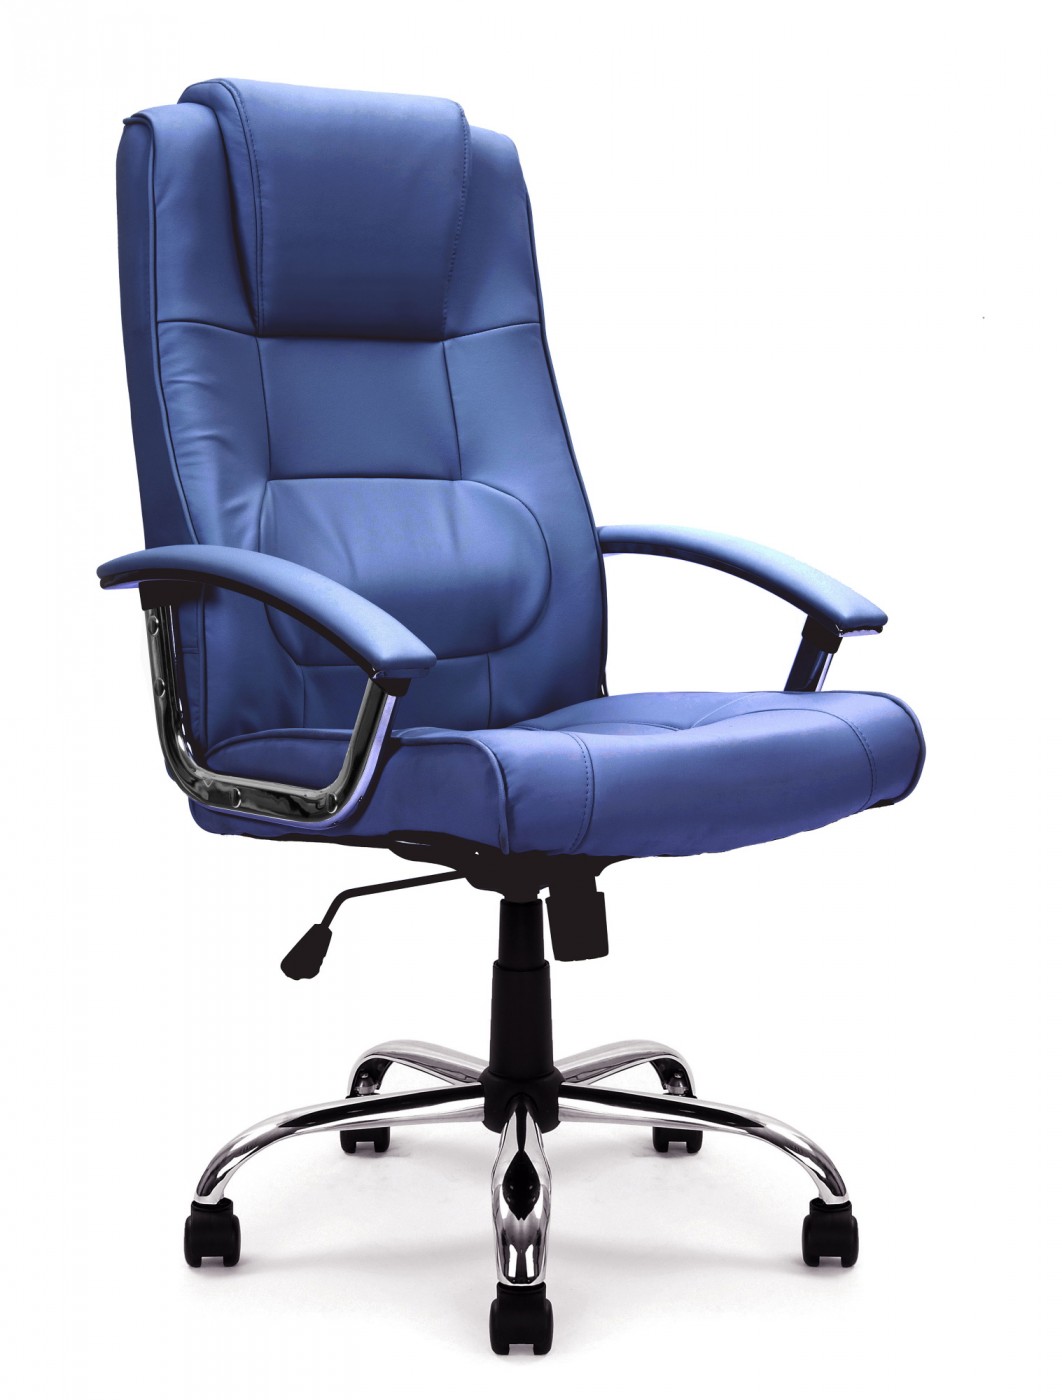 Office Chair Blue Leather Westminster Executive Chair 2008ATG/LBL | 121